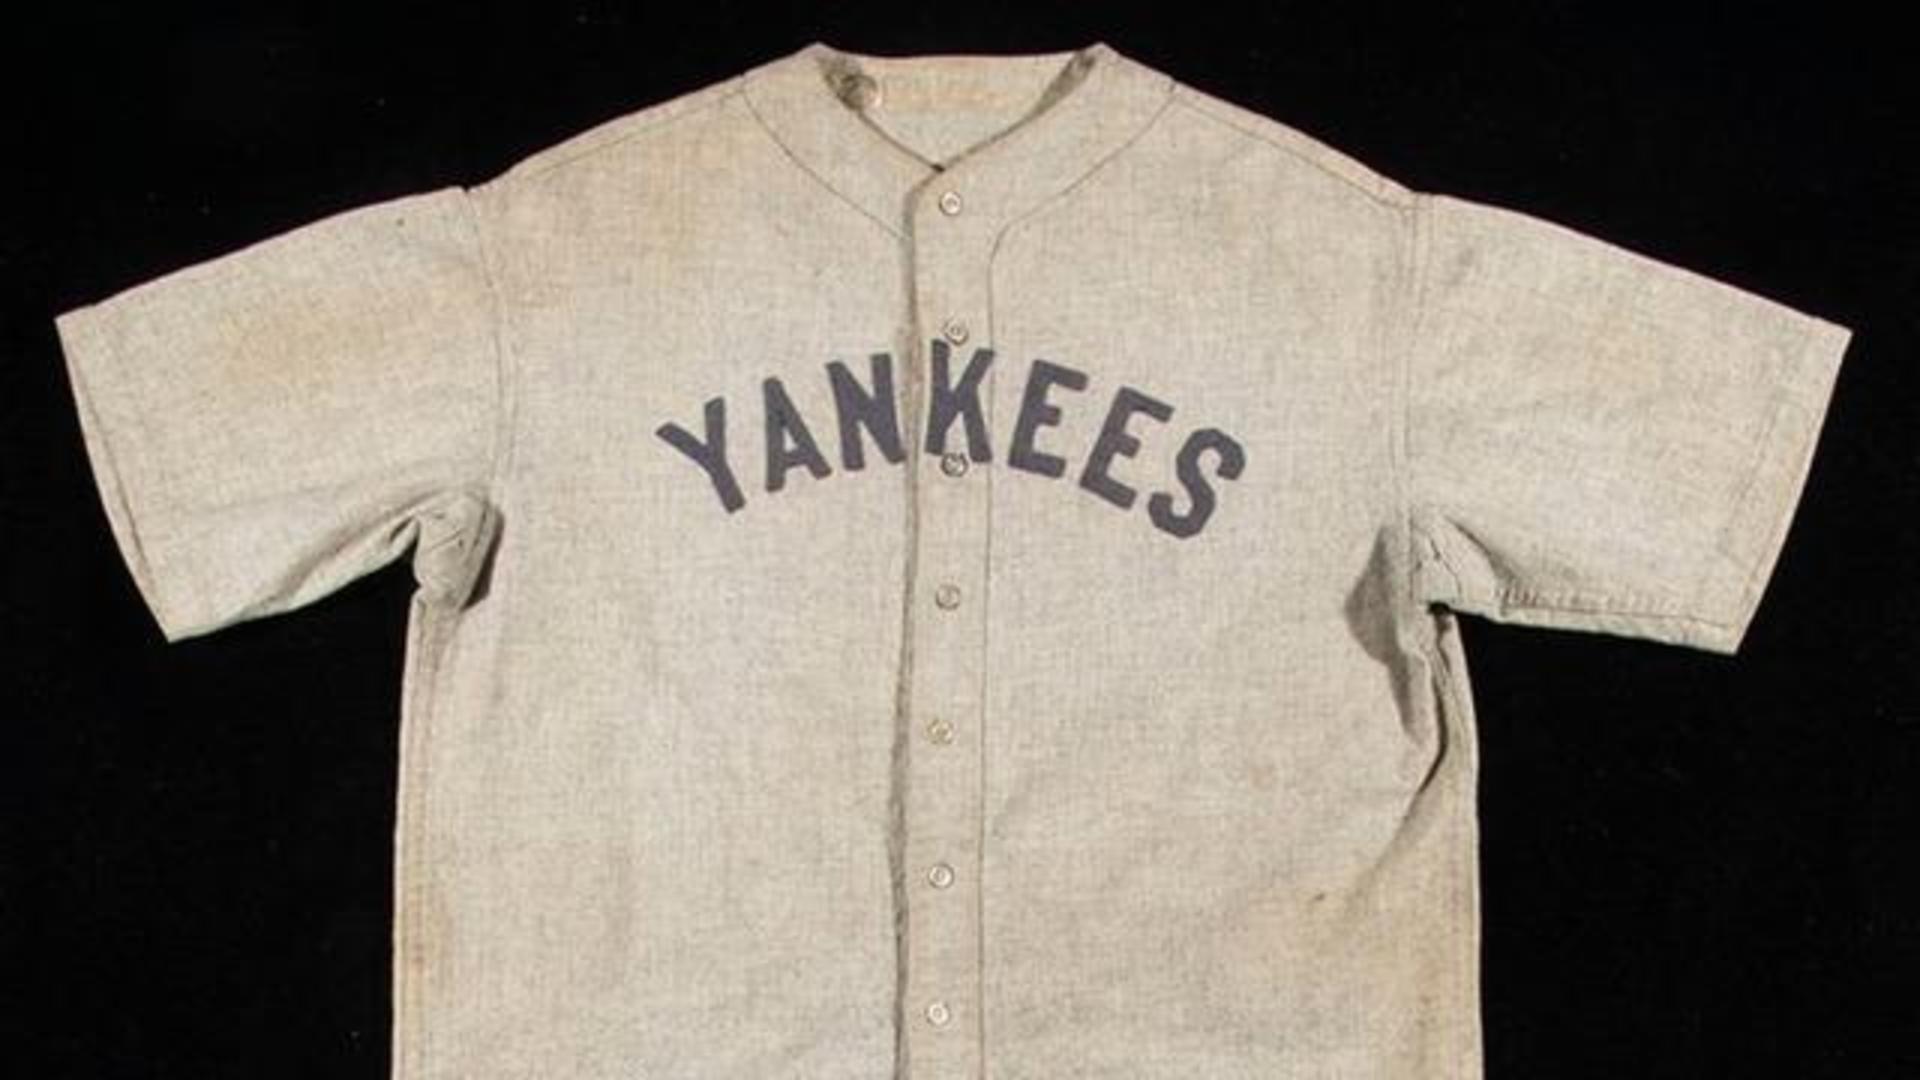 Babe Ruth jersey fetches record-breaking $5.6 million at auction - CBS News